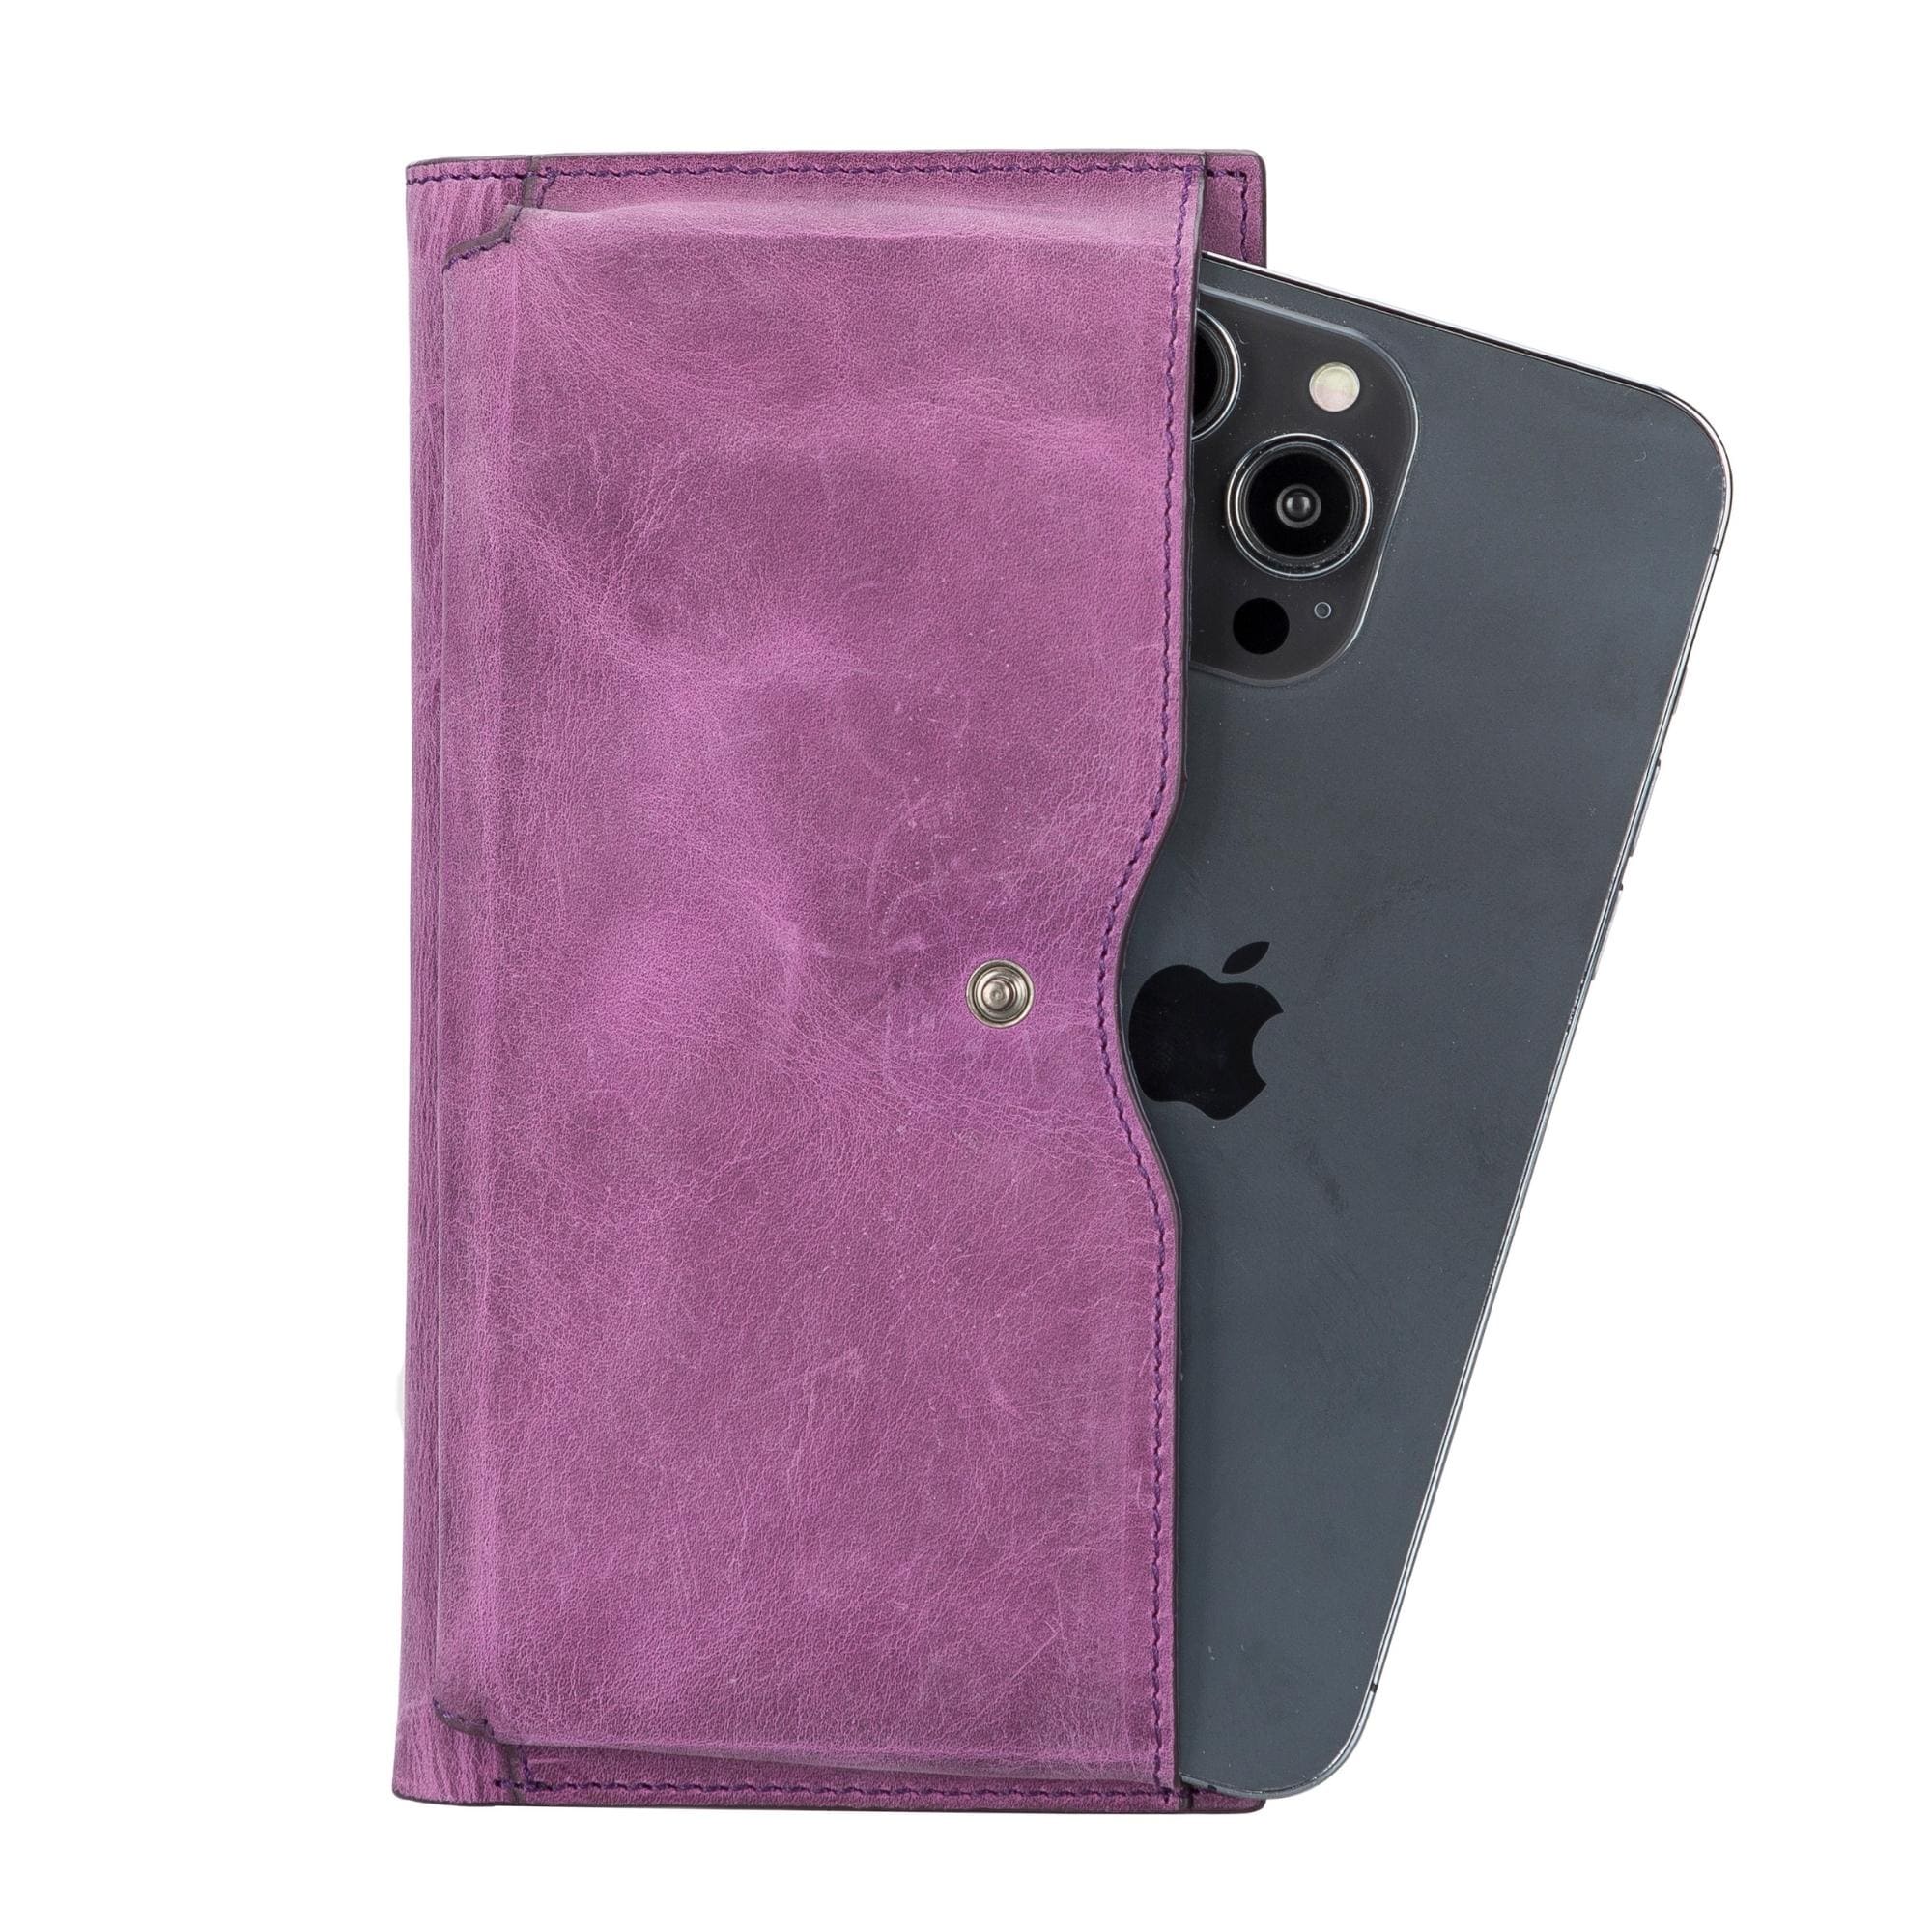 Riverton Leather Wallet for Women with Phone Section - Purple - TORONATA